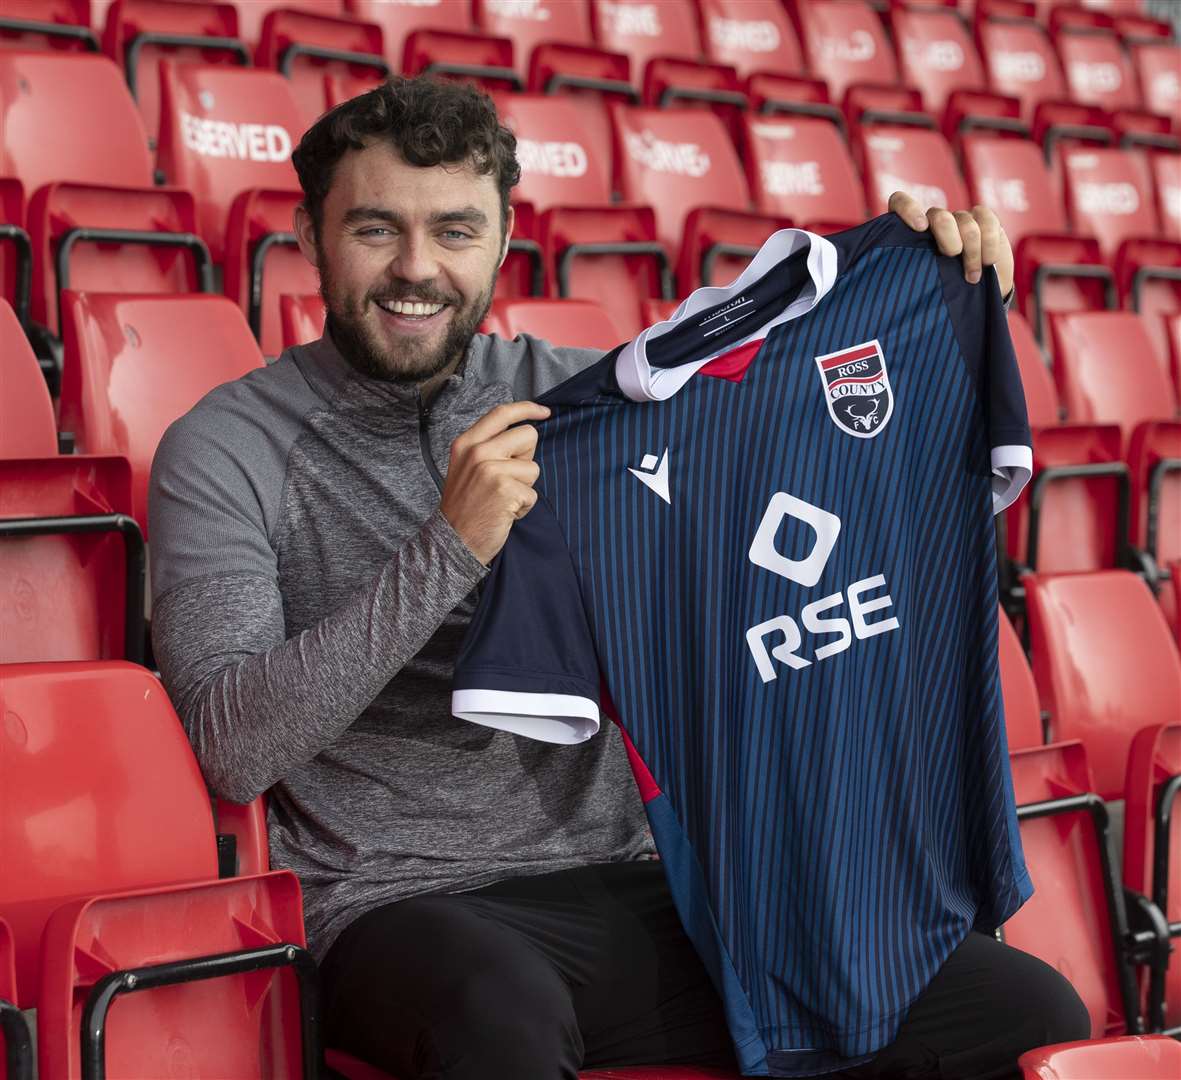 Picture - Ken Macpherson, Inverness. See story. Ross County new signing Connor Randall, pictured yesterday (Thurs) in the Global Energy Stadium, Victoria Park, Dingwall.